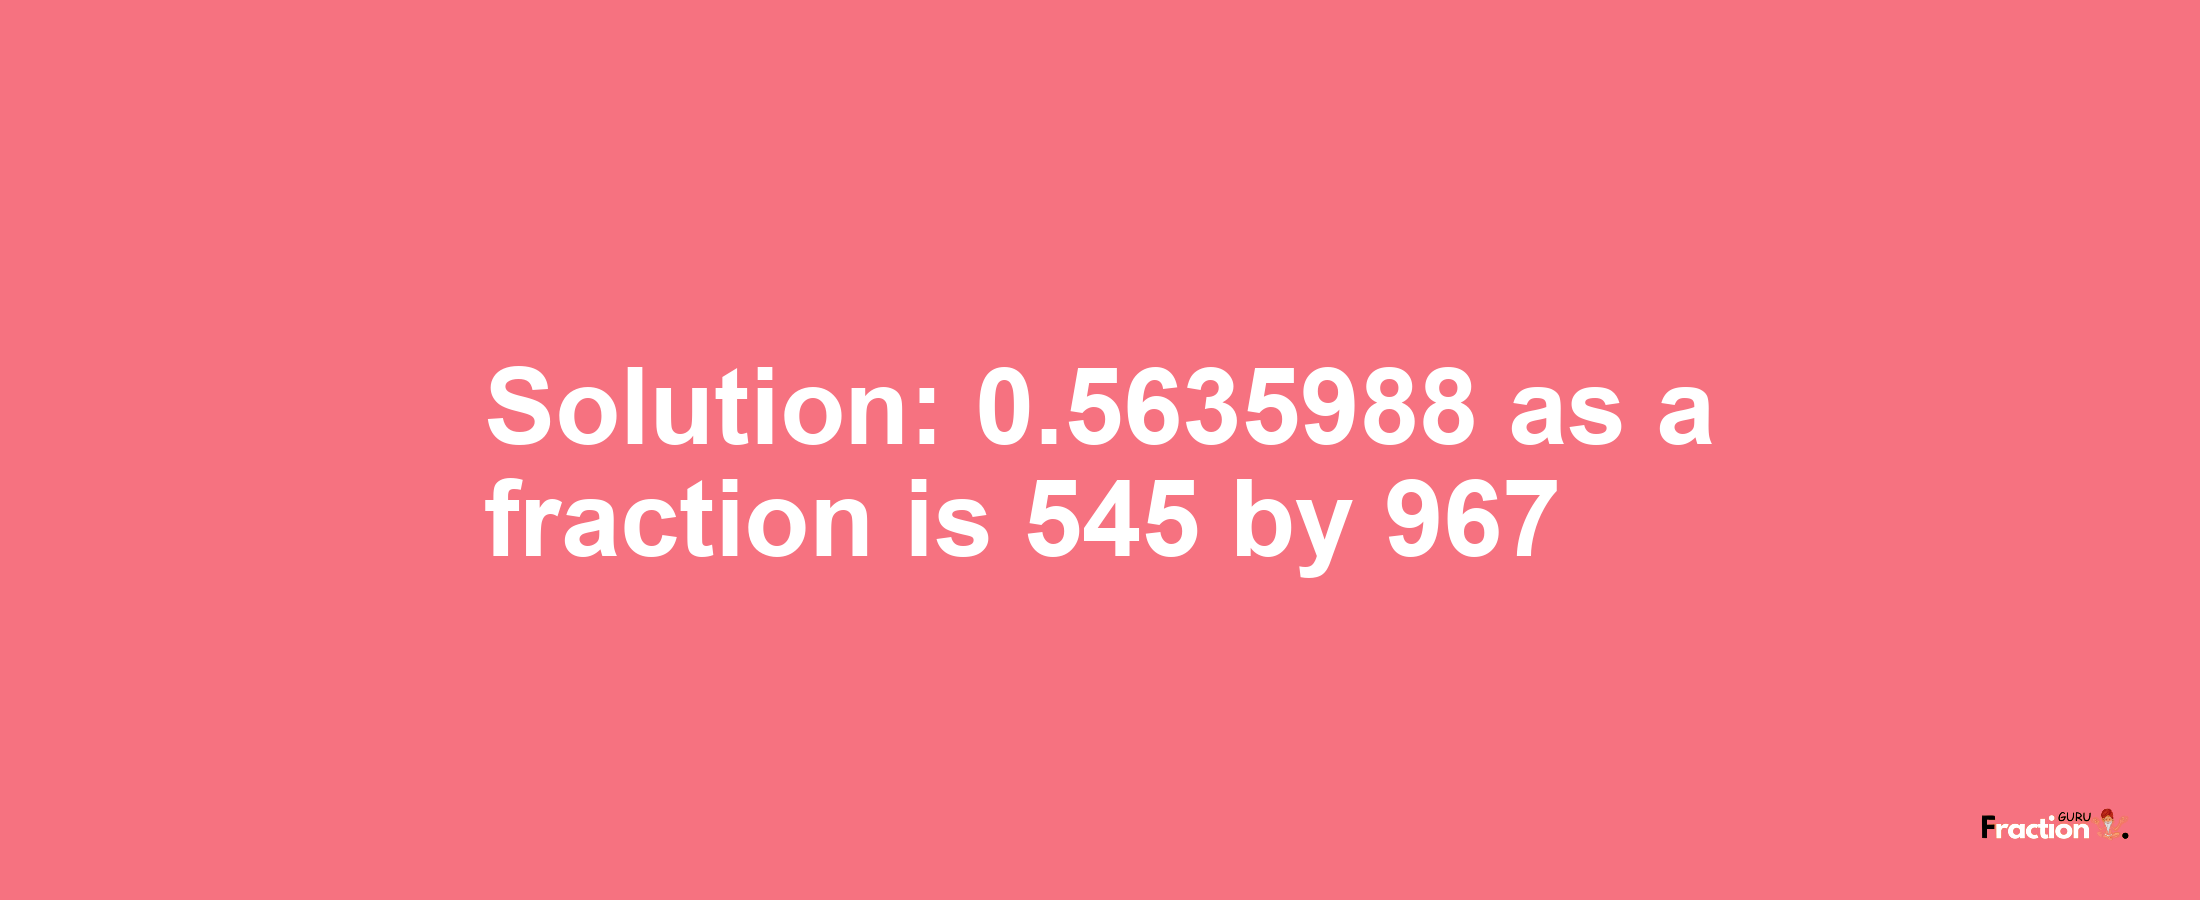 Solution:0.5635988 as a fraction is 545/967